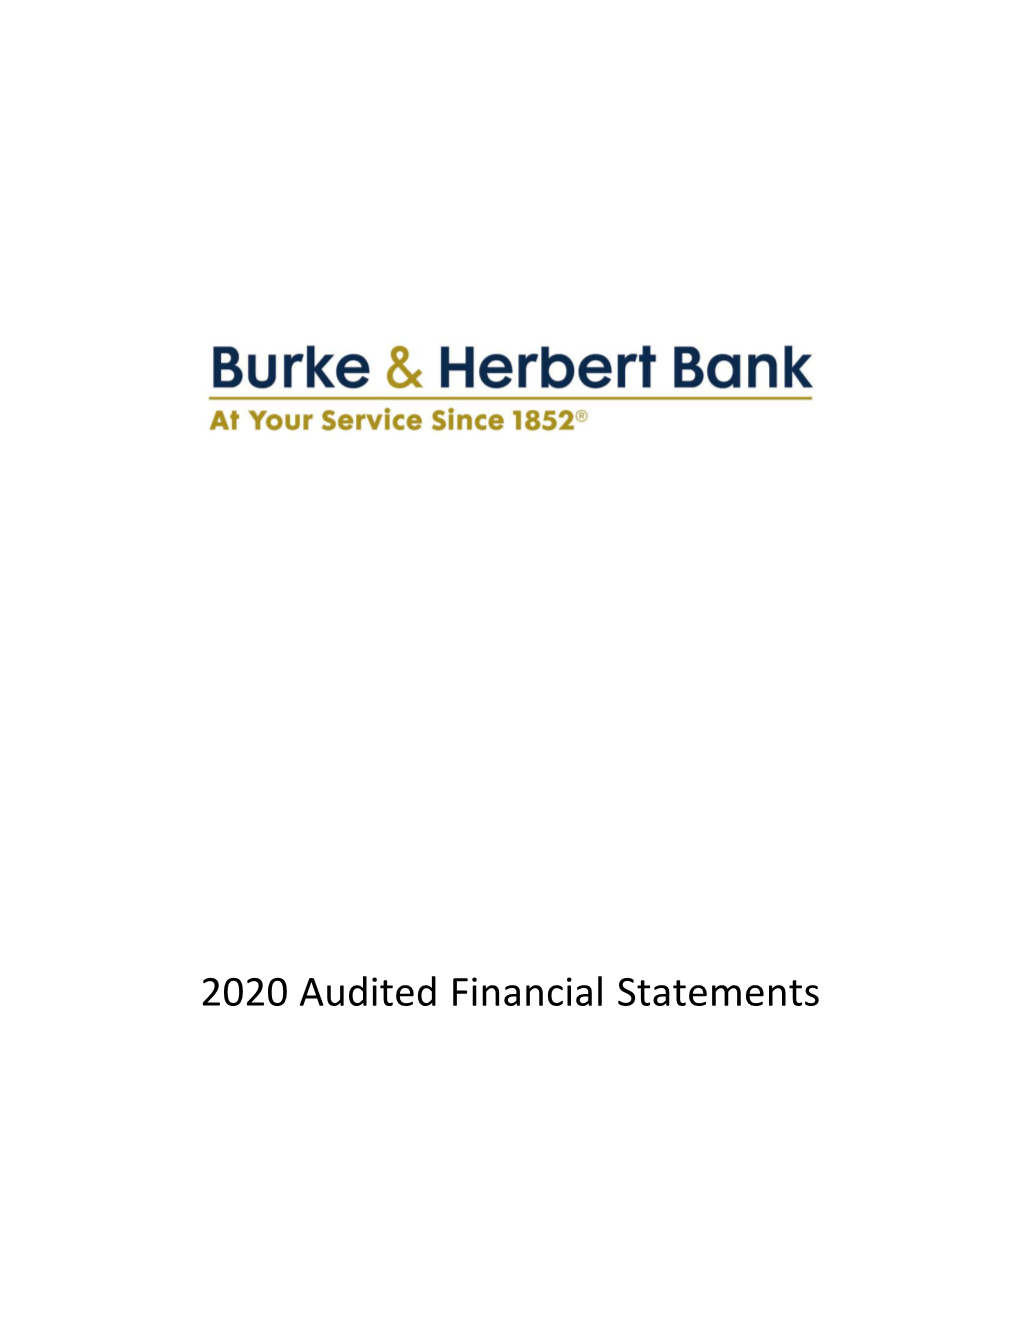 B&HB 2020 Audited Financial Statements